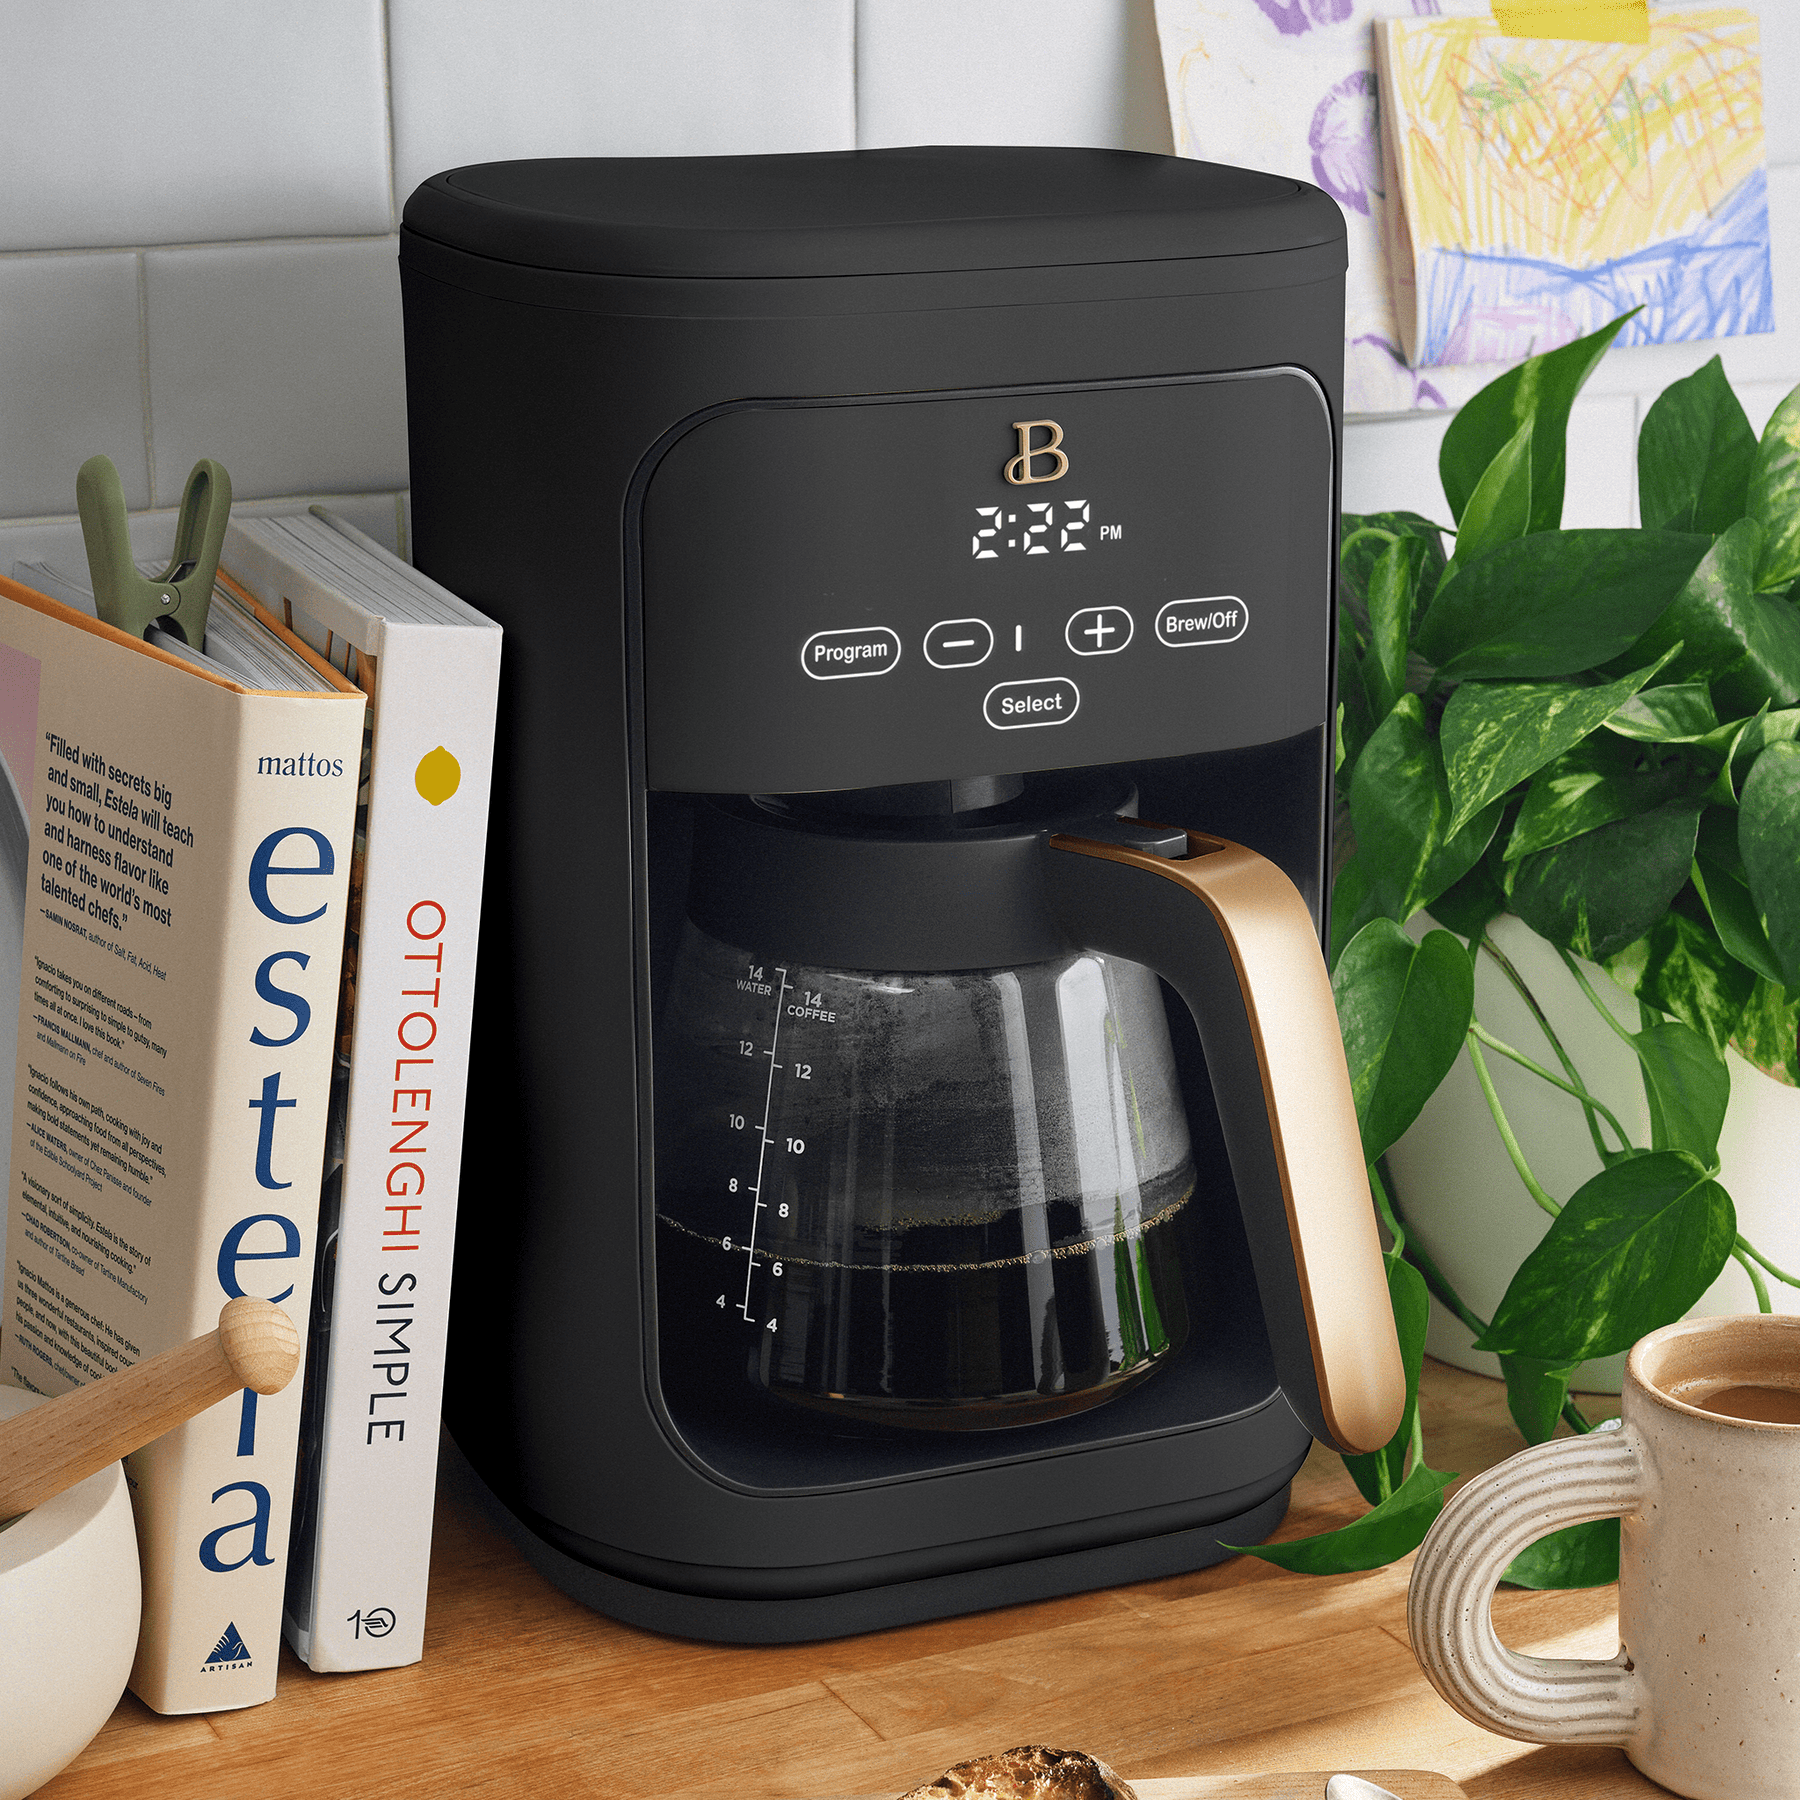 Fall in love with these 11 beautiful coffee makers that history forgot